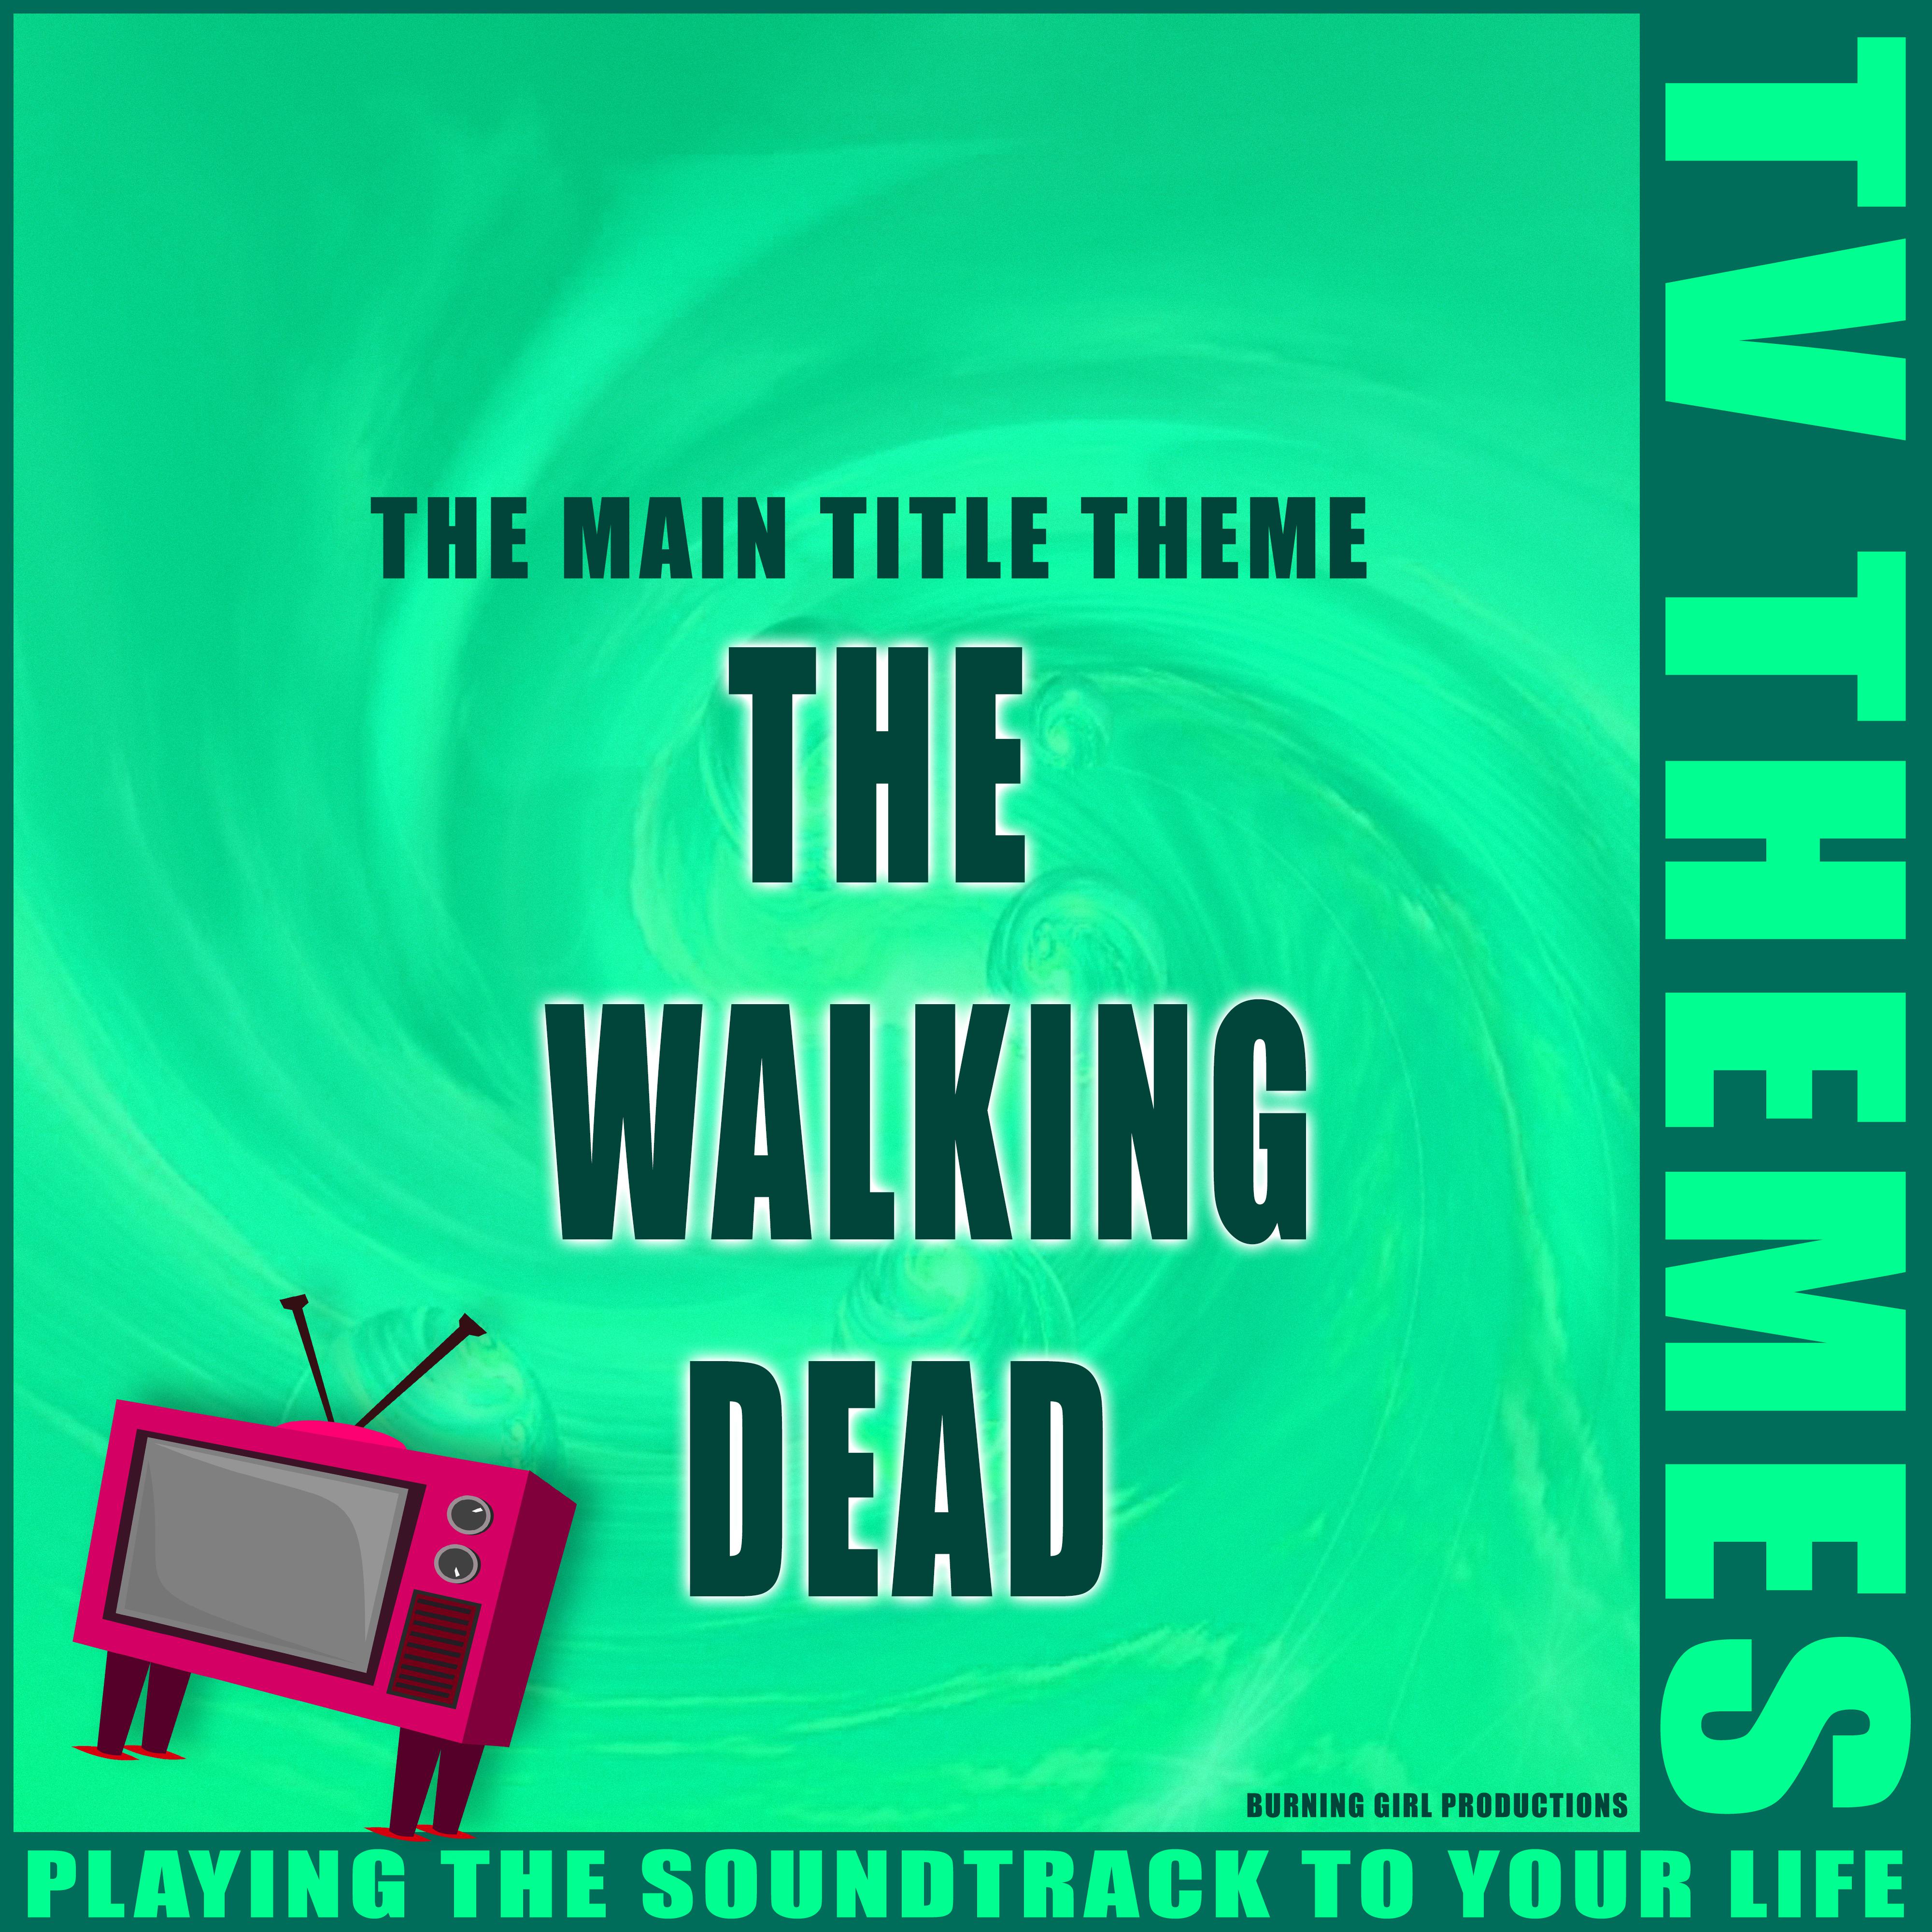 The Main Title Theme - The Walking Dead